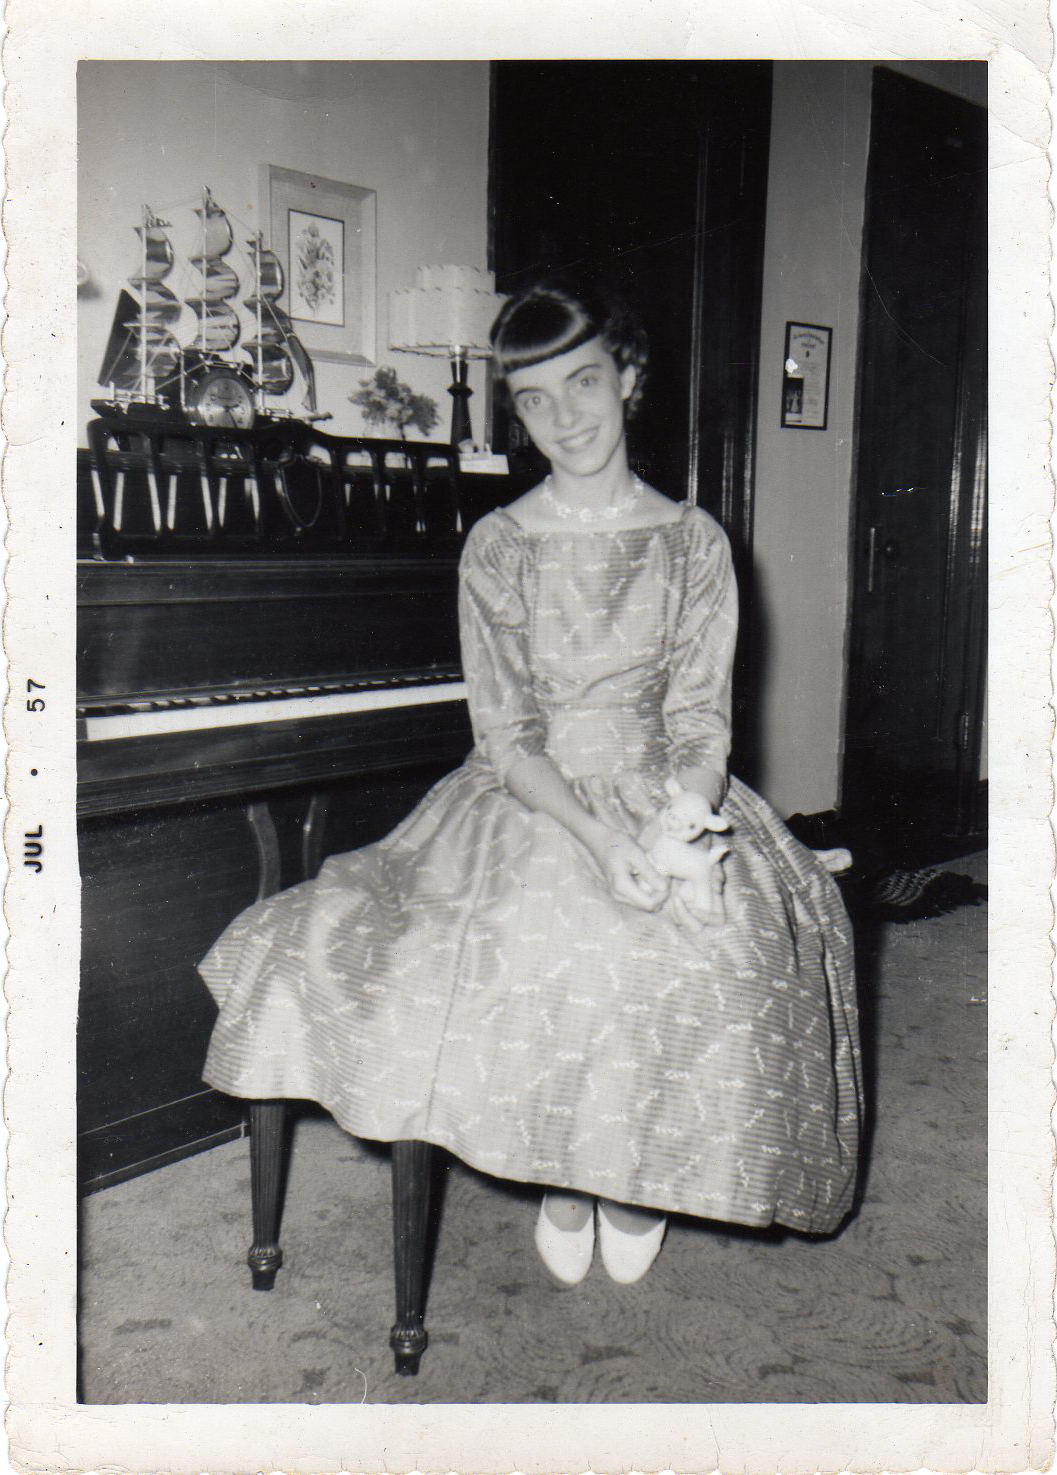 mom on piano bench